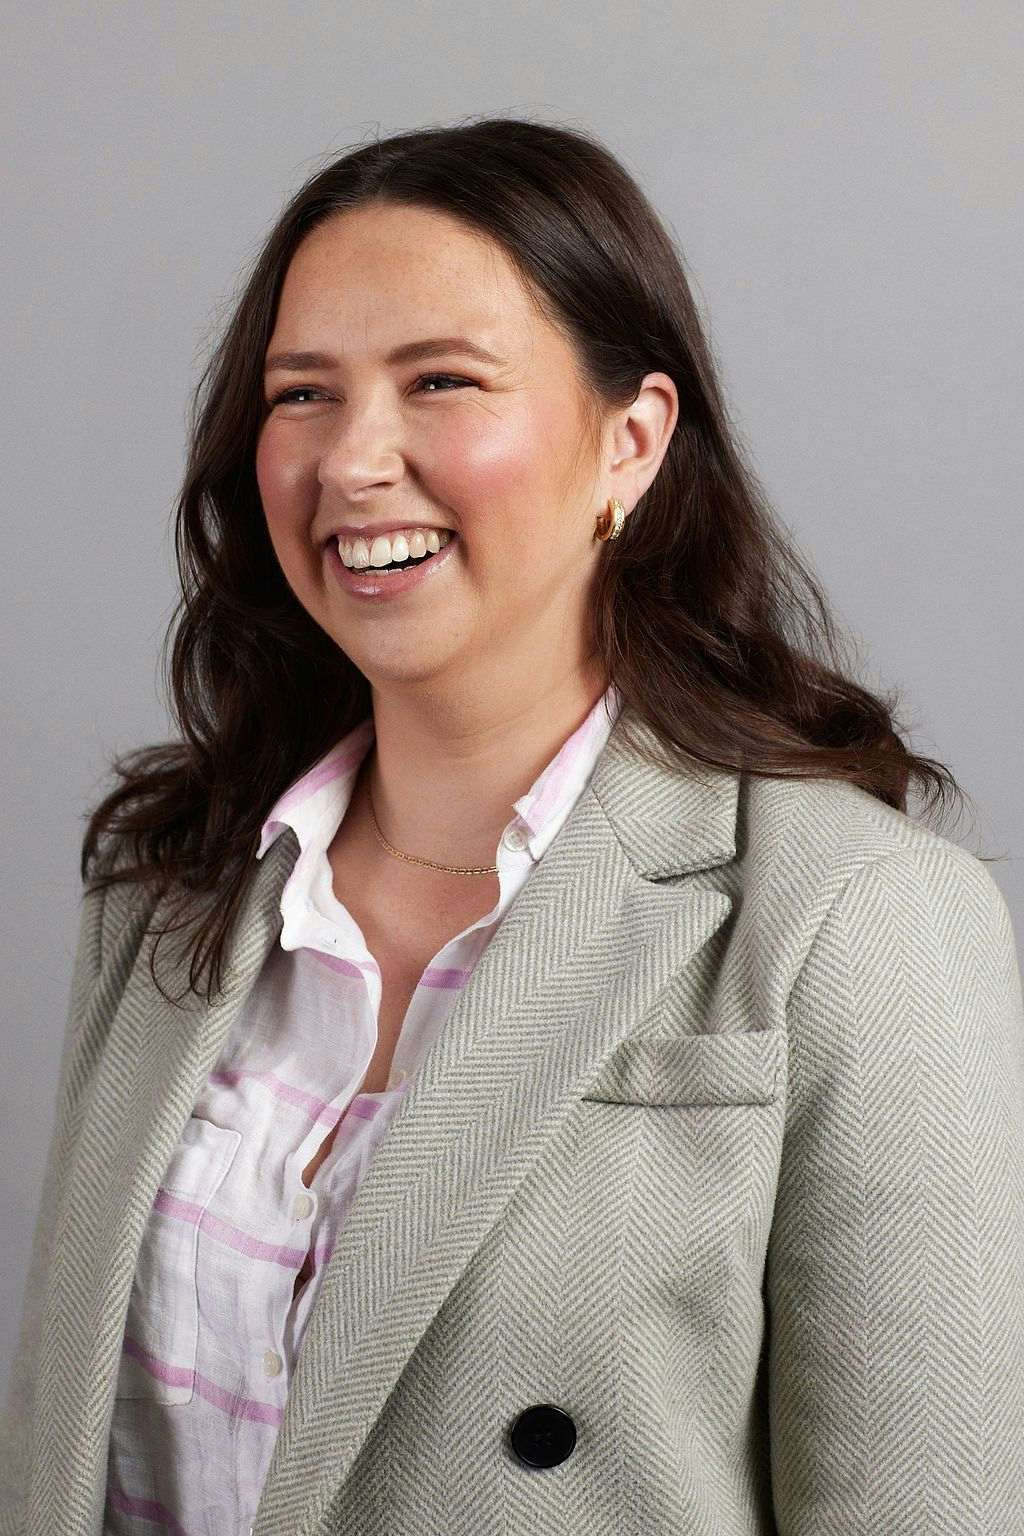 Headshot of Hannah smiling and wearing a white shirt and grey blazer.